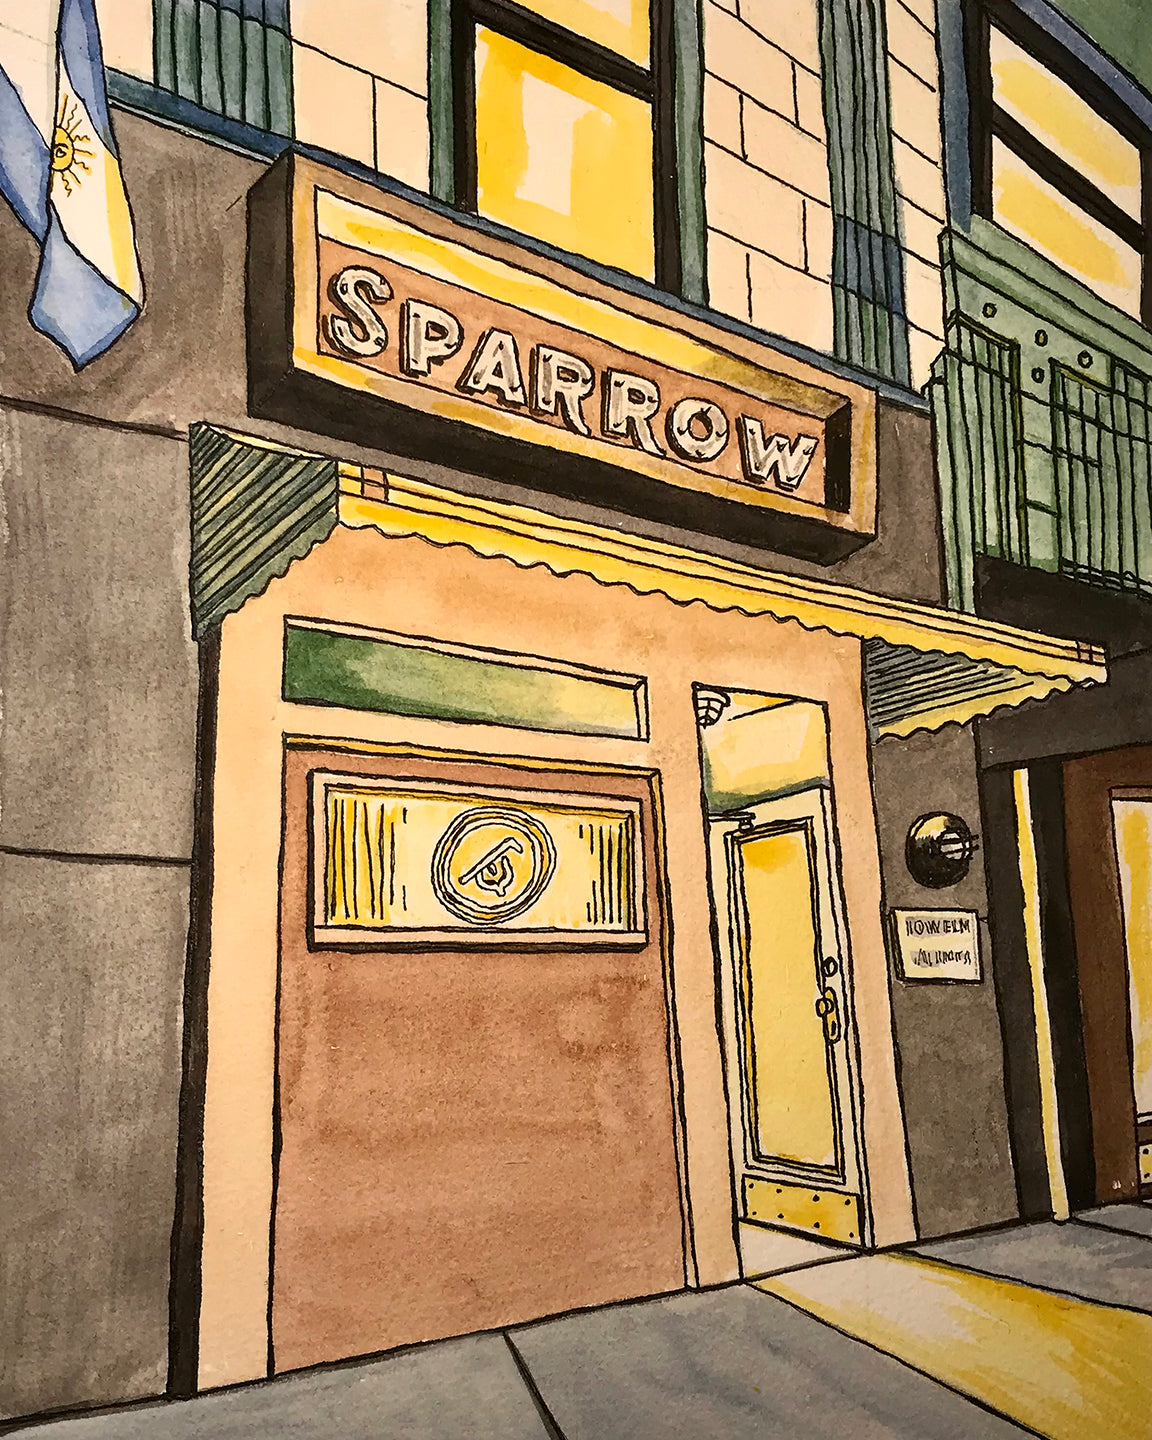 Sparrow, a Chicago cocktail bar, signed art prints. (ships free in the US)